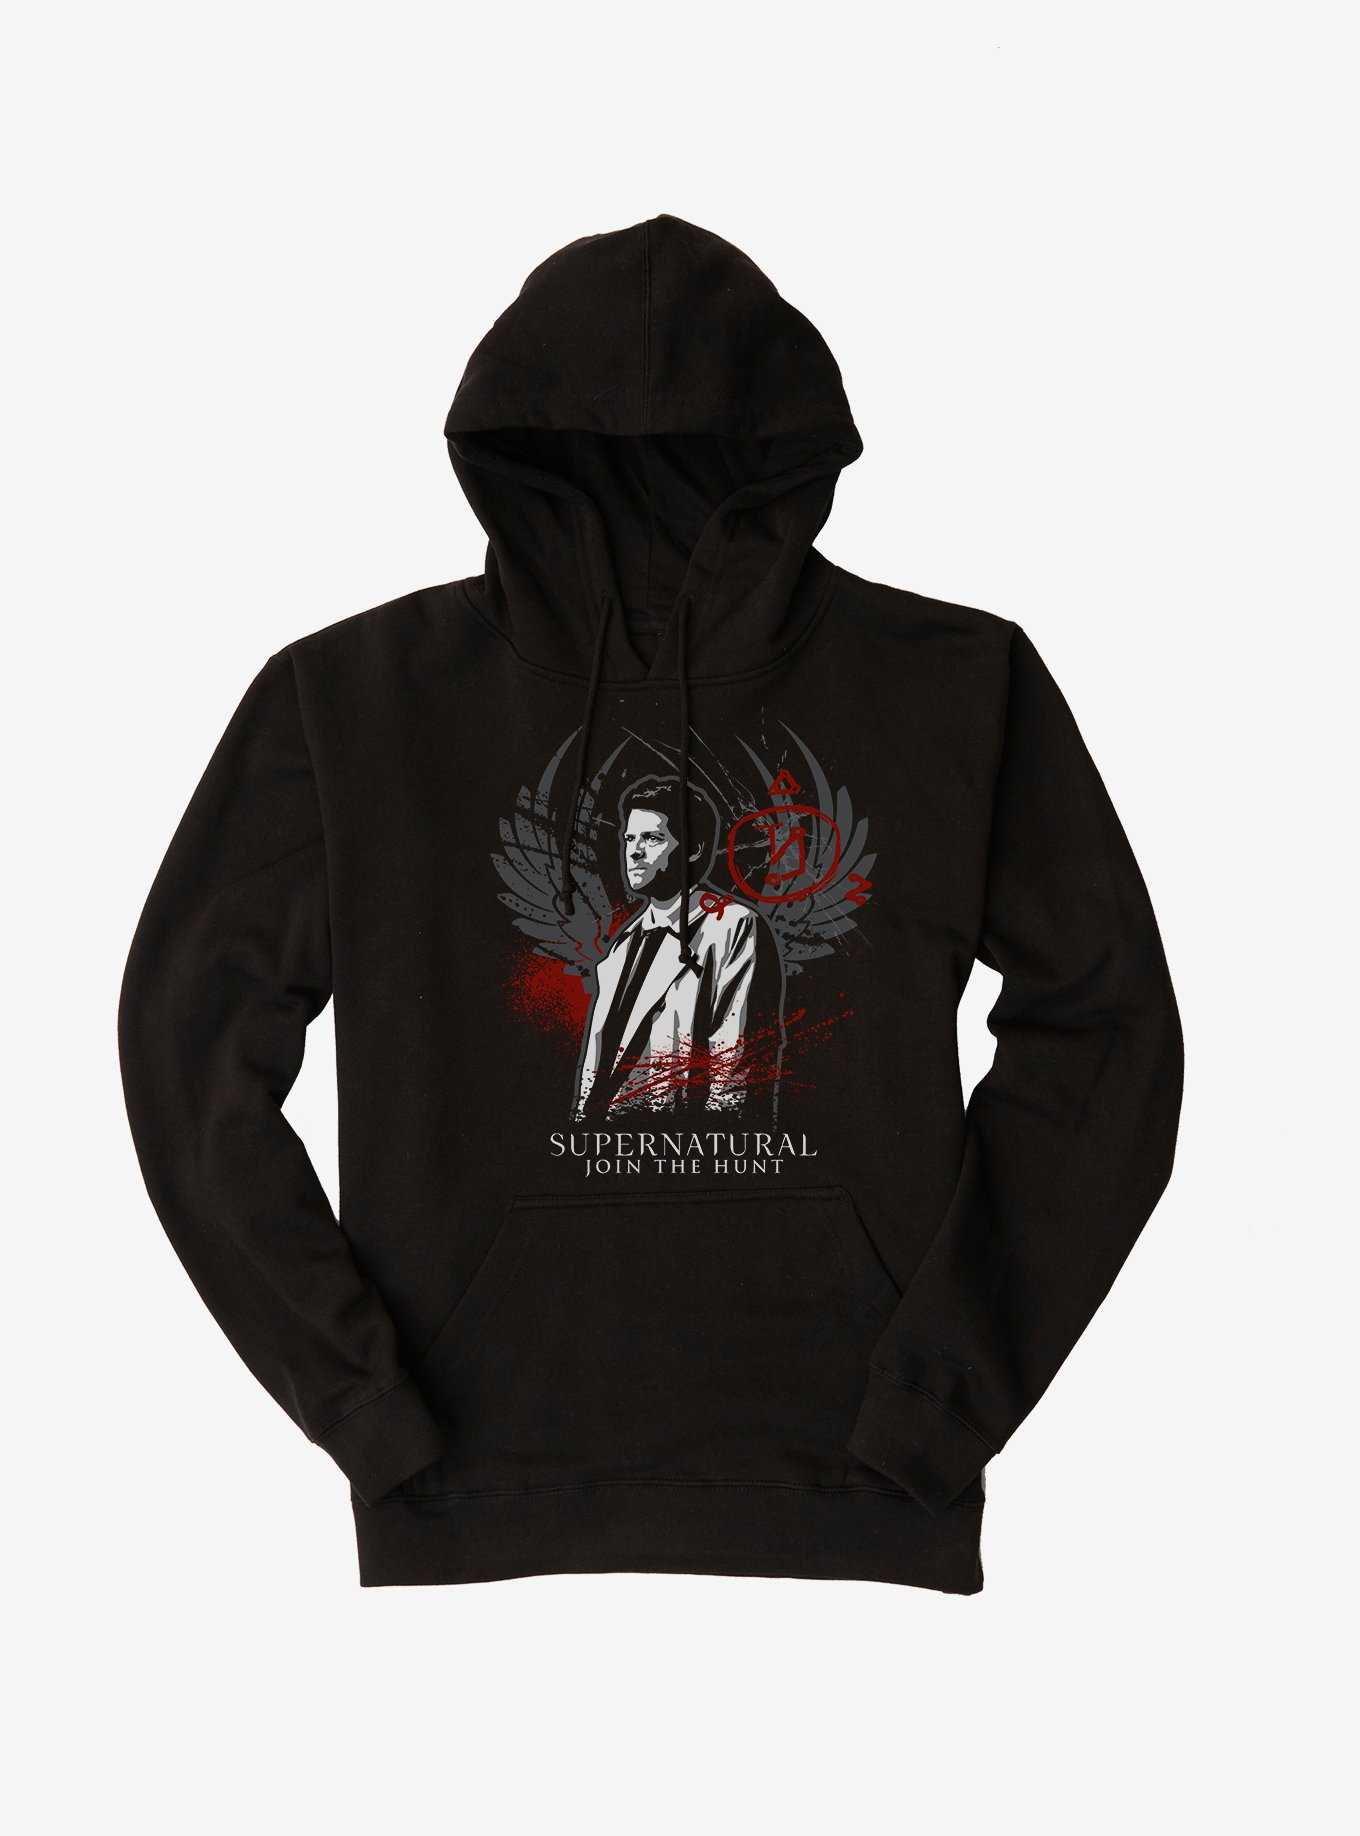 Supernatural Merchandise Store - Chief Executive Officer - TDA Creative